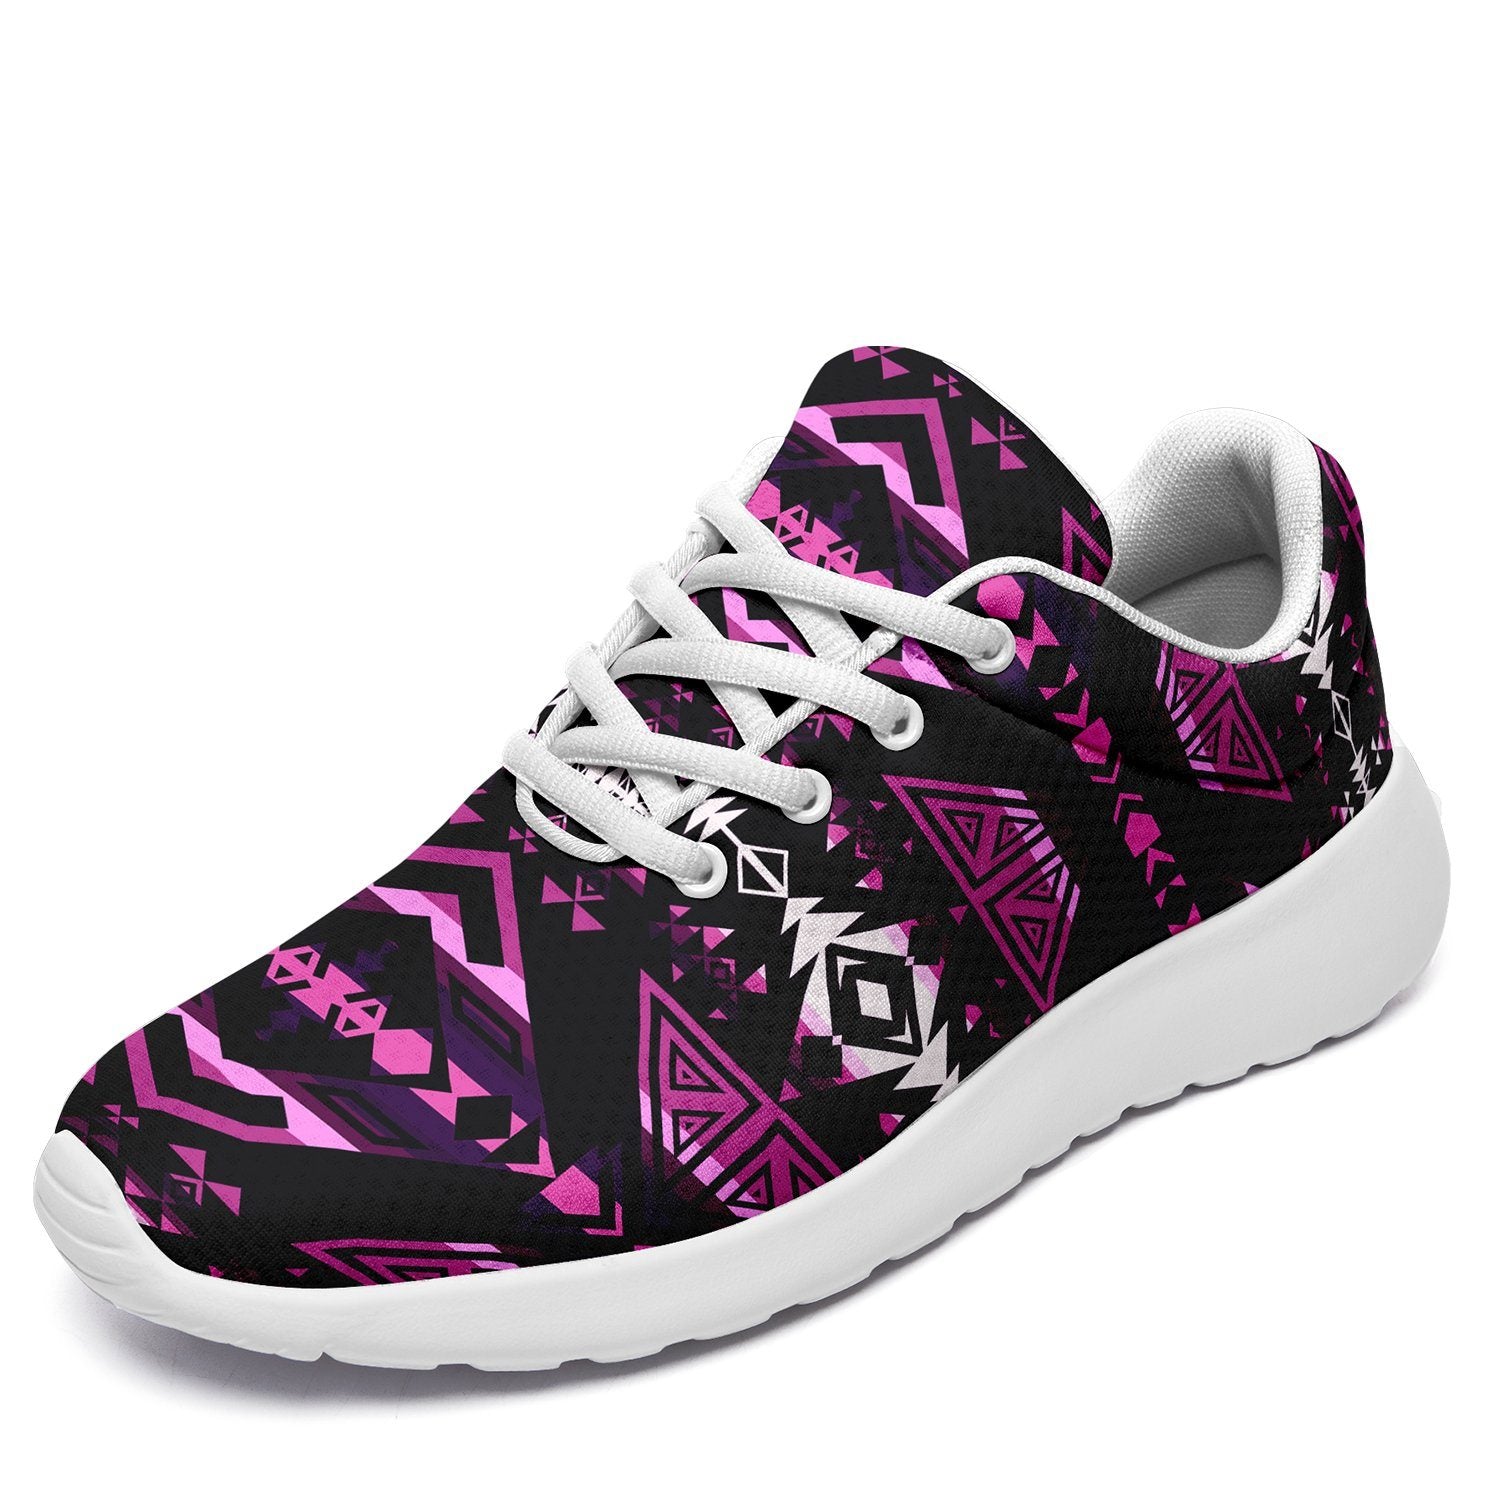 Upstream Expedition Moonlight Shadows Ikkaayi Sport Sneakers 49 Dzine US Women 4.5 / US Youth 3.5 / EUR 35 White Sole 